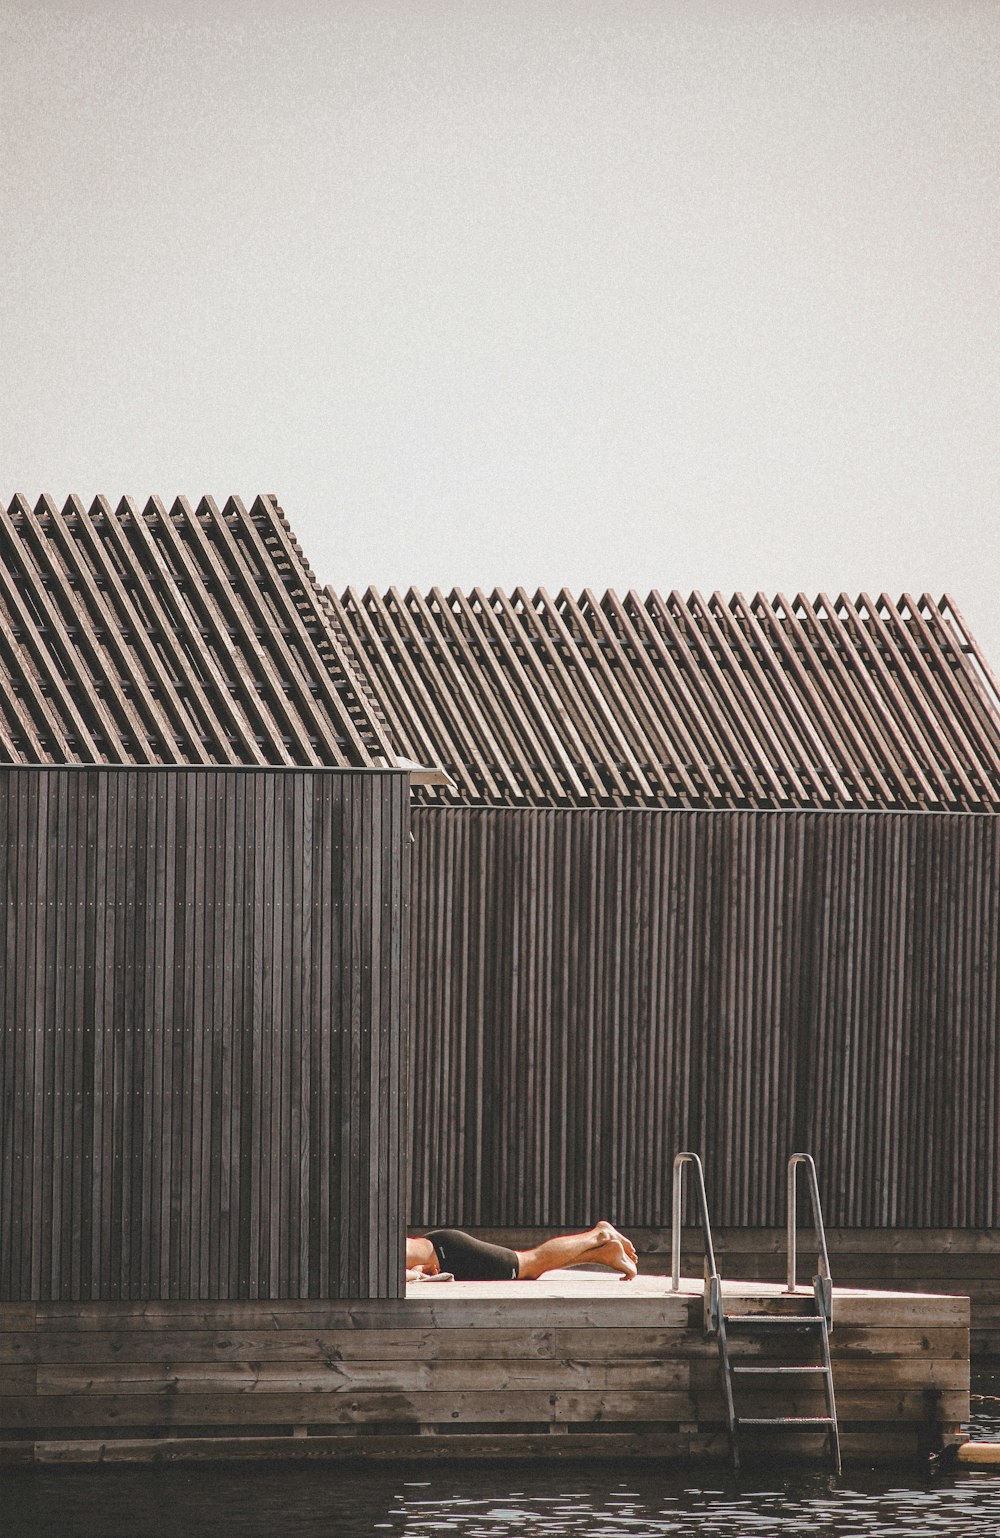 a person laying on a dock in front of a building